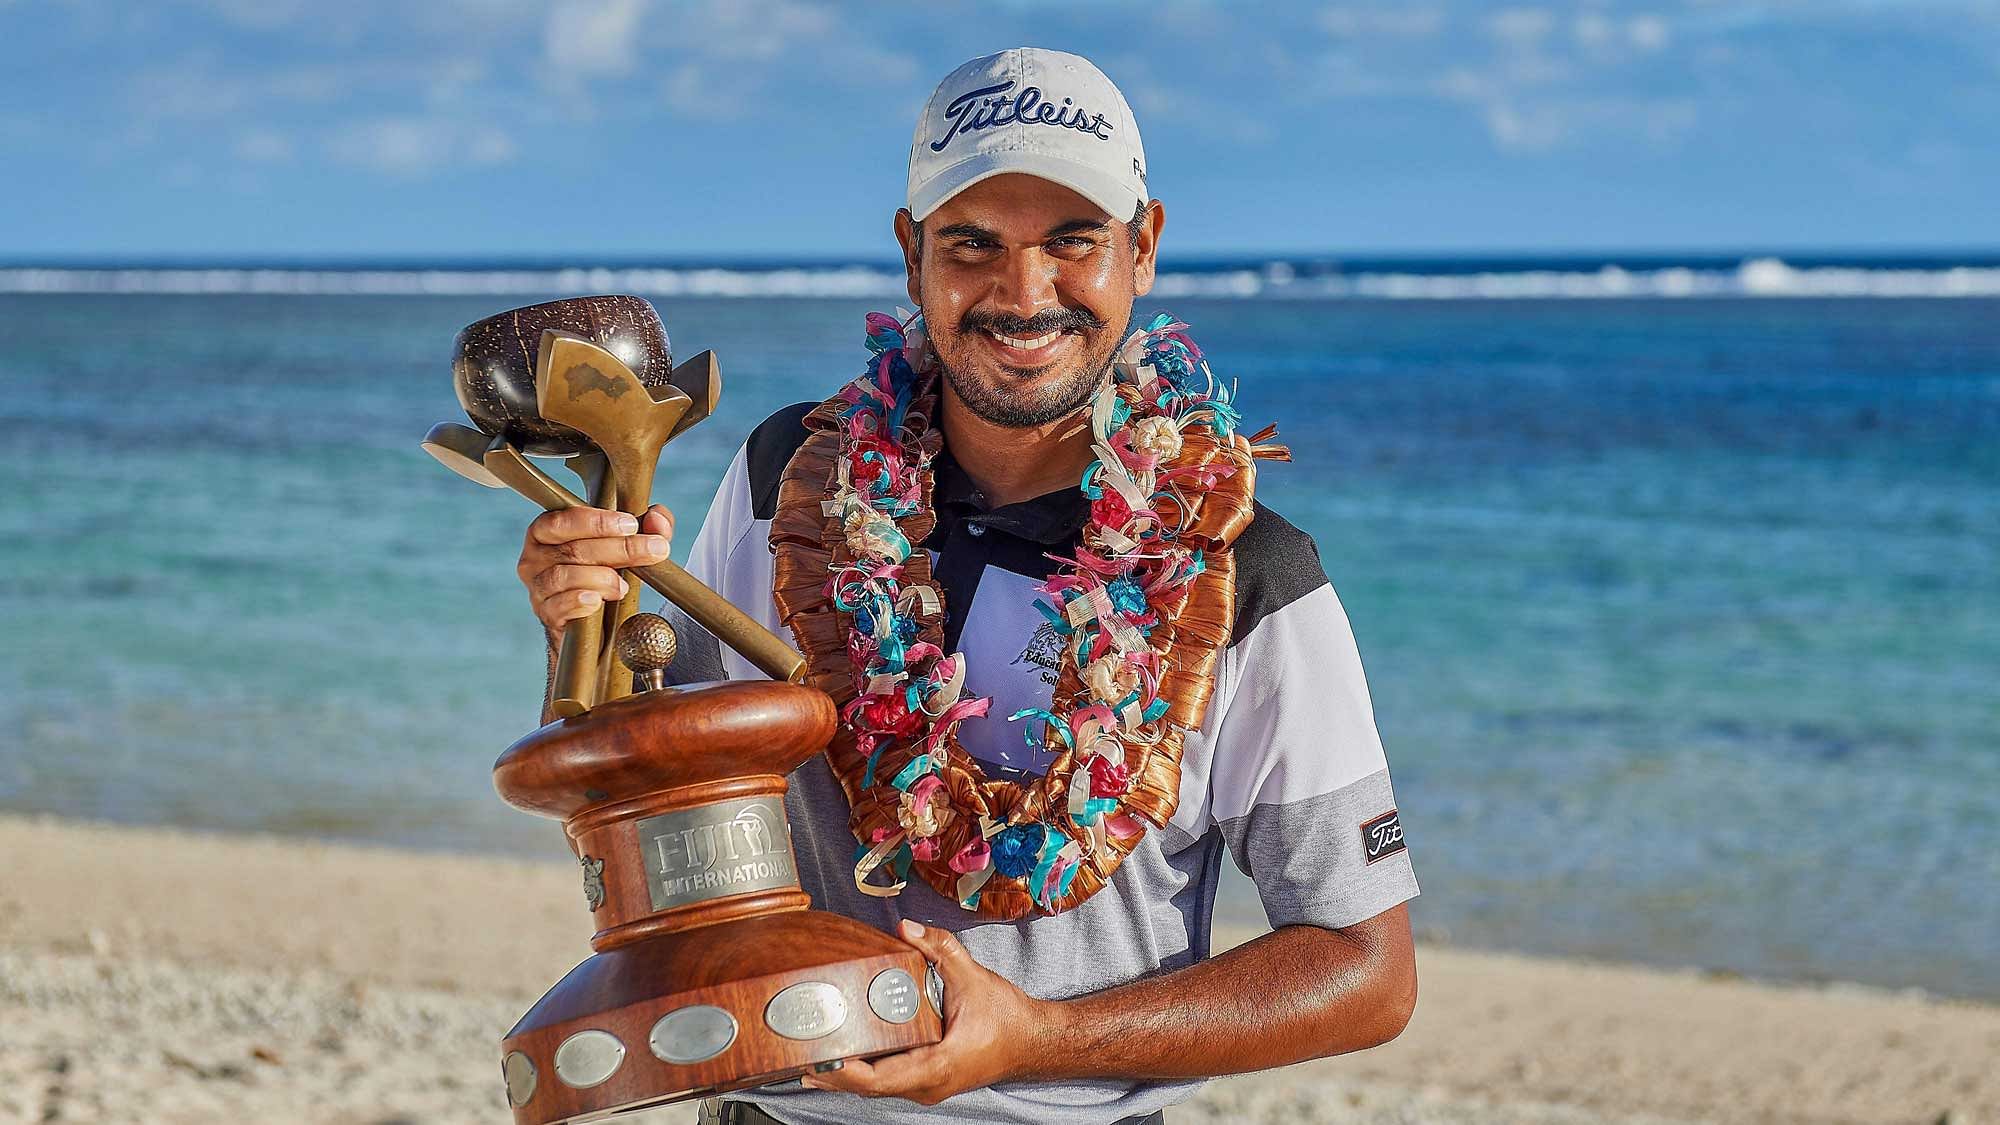 Indian golfer Gaganjeet Bhullar poses with the trophy after winning his maiden European Tour title with a brilliant chip-in eagle on the 17th hole for a one-stroke win over Australia’s  Anthony Quayle during the Fiji International Golf at The Intercontinental Gold Club in Fiji on Sunday.